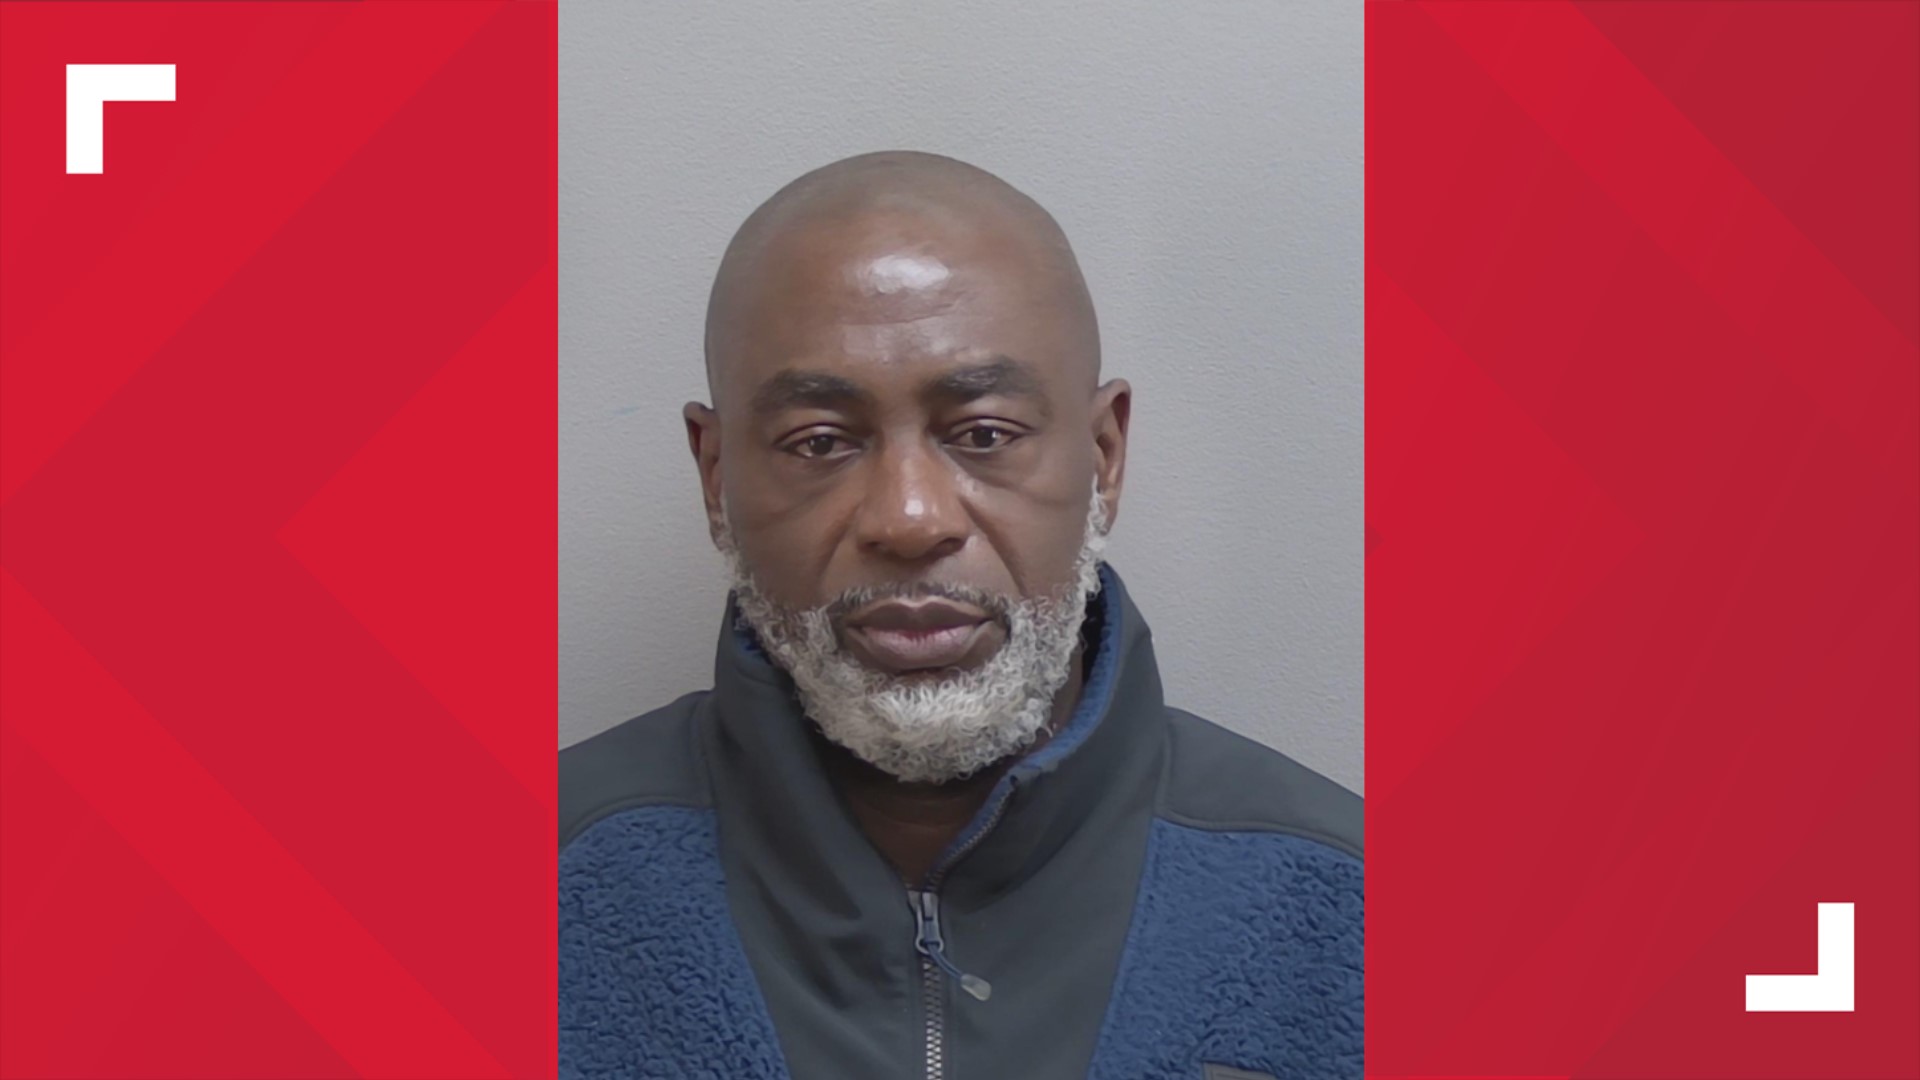 The Virginia Beach Police Department confirmed the employee is Gary Clark, who was listed as the assistant principal on the school's website.